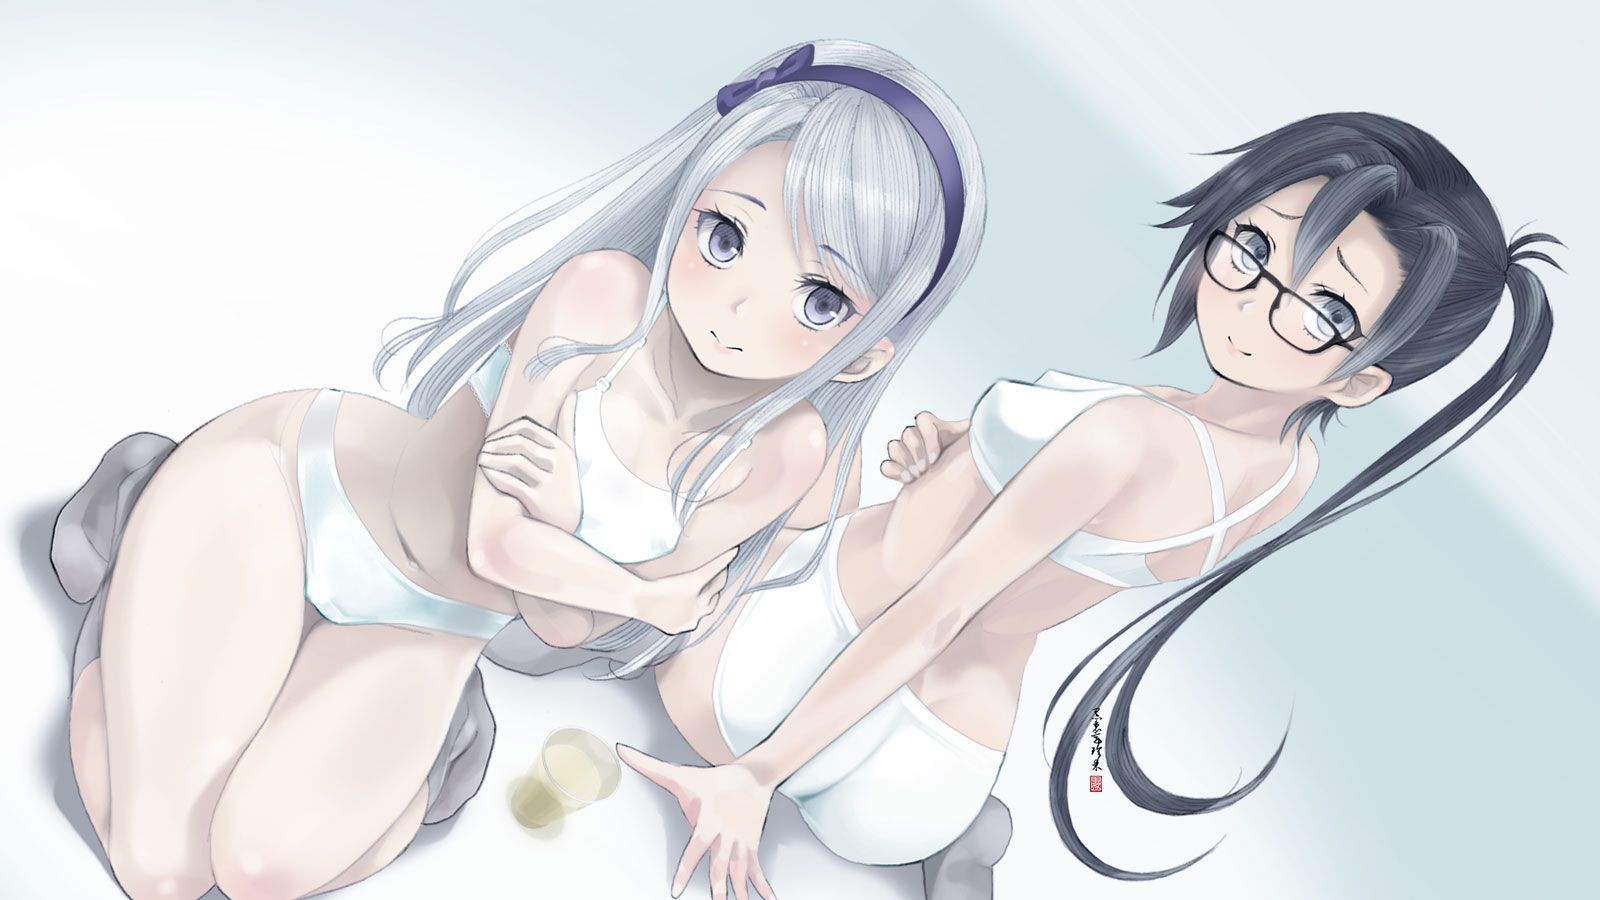 [Secondary ZIP] Amagiri-chan's image summary of the ship that seems not bad also abs girls 11